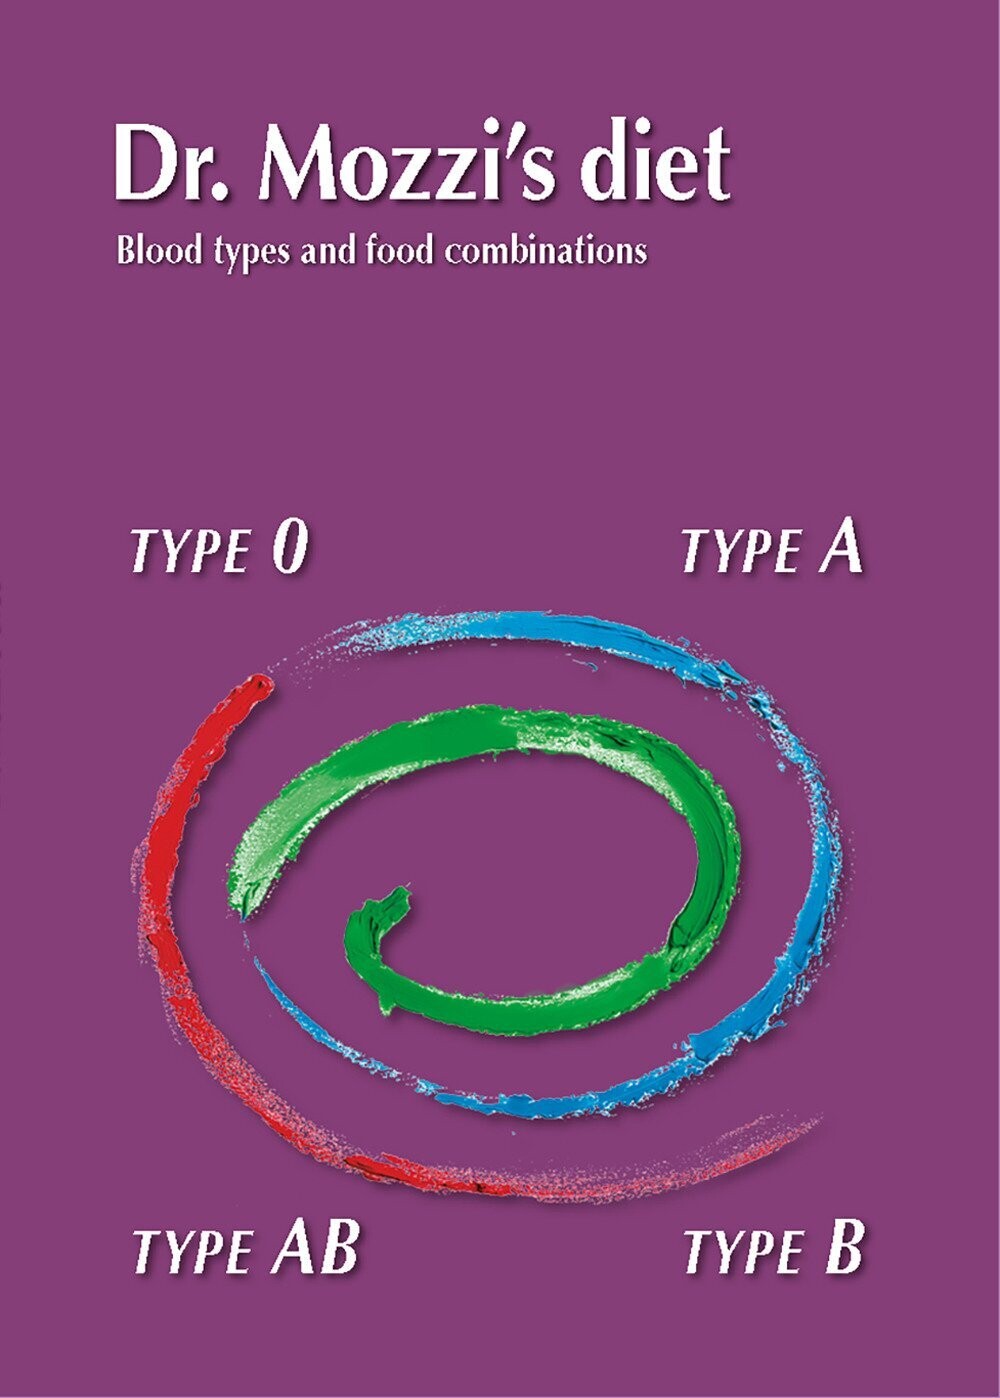 Dr. Mozzi's diet. Blood types and food combinations